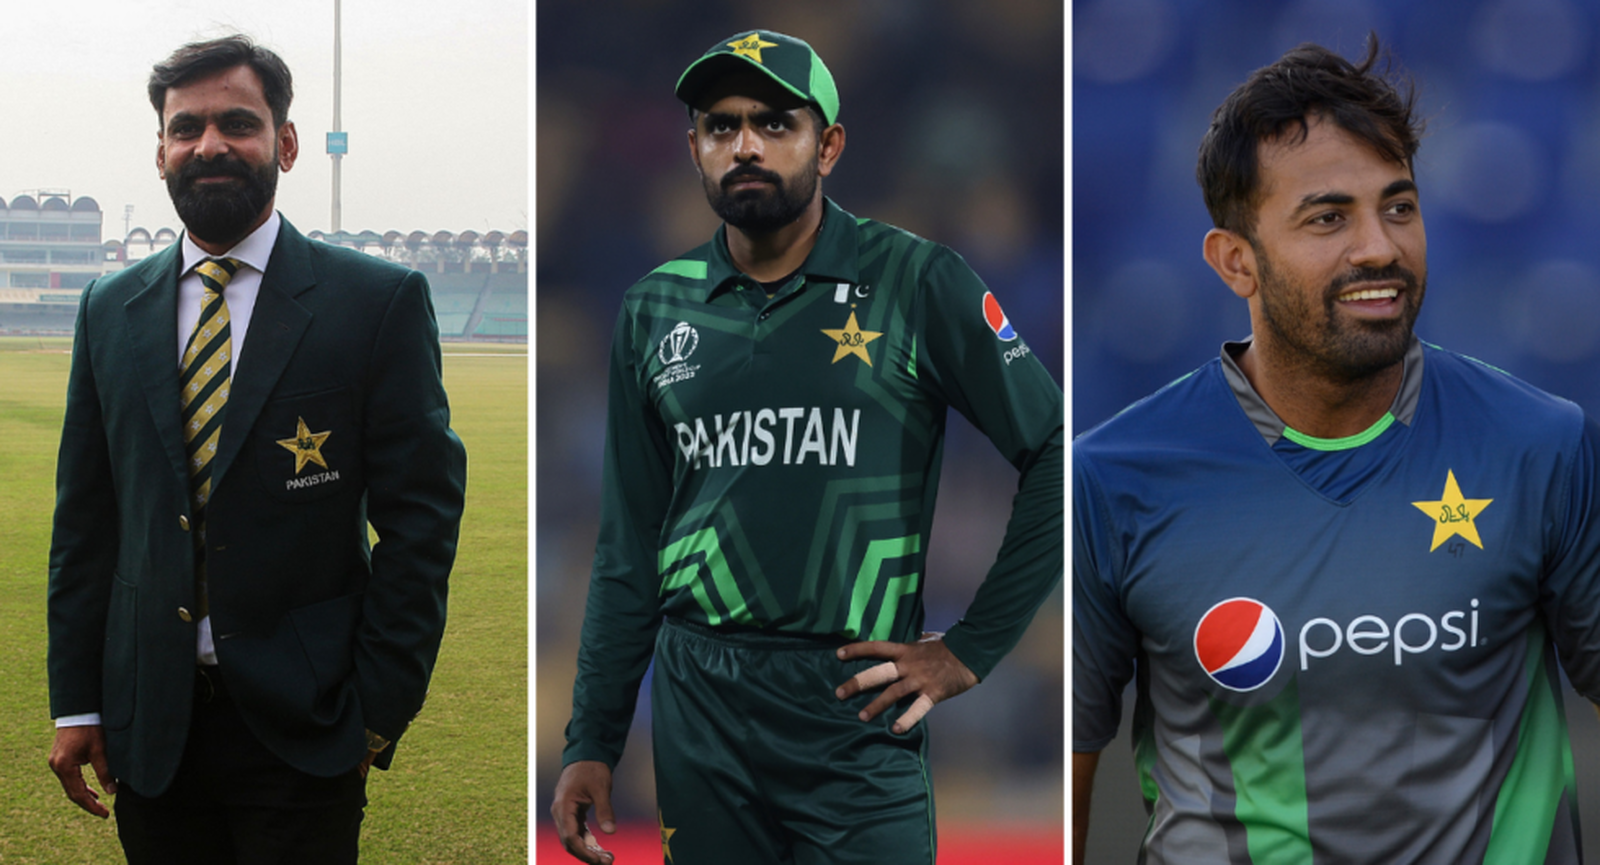 Mohammad Hafeez, Babar Azam and Wahab Riaz were all part of PCB announcements this week